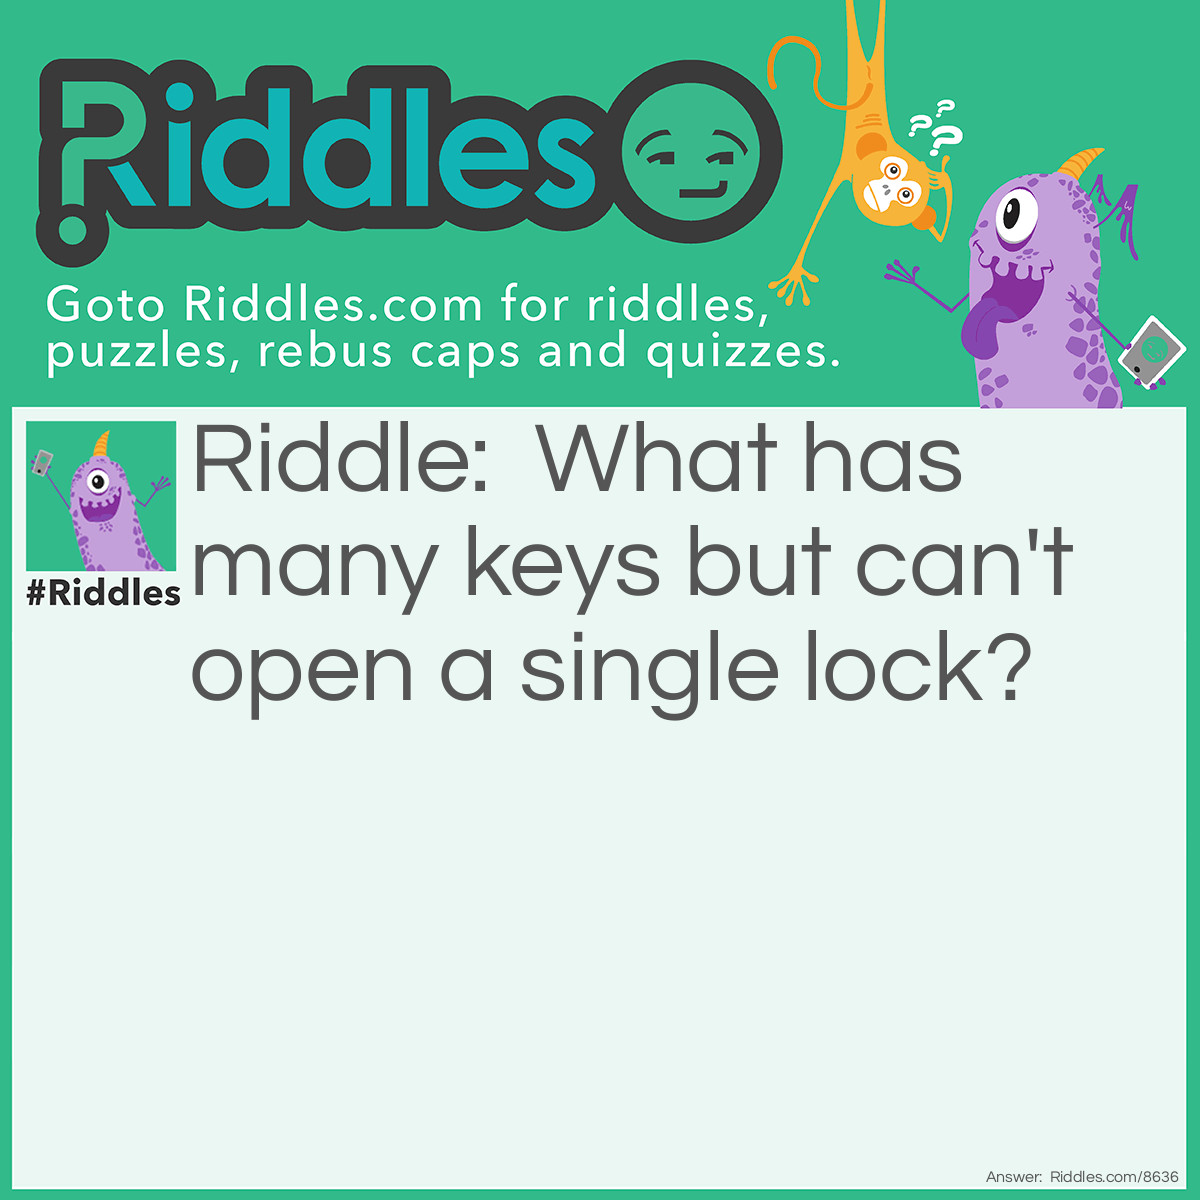 Riddle: What has many keys but can't open a single lock? Answer: A piano.